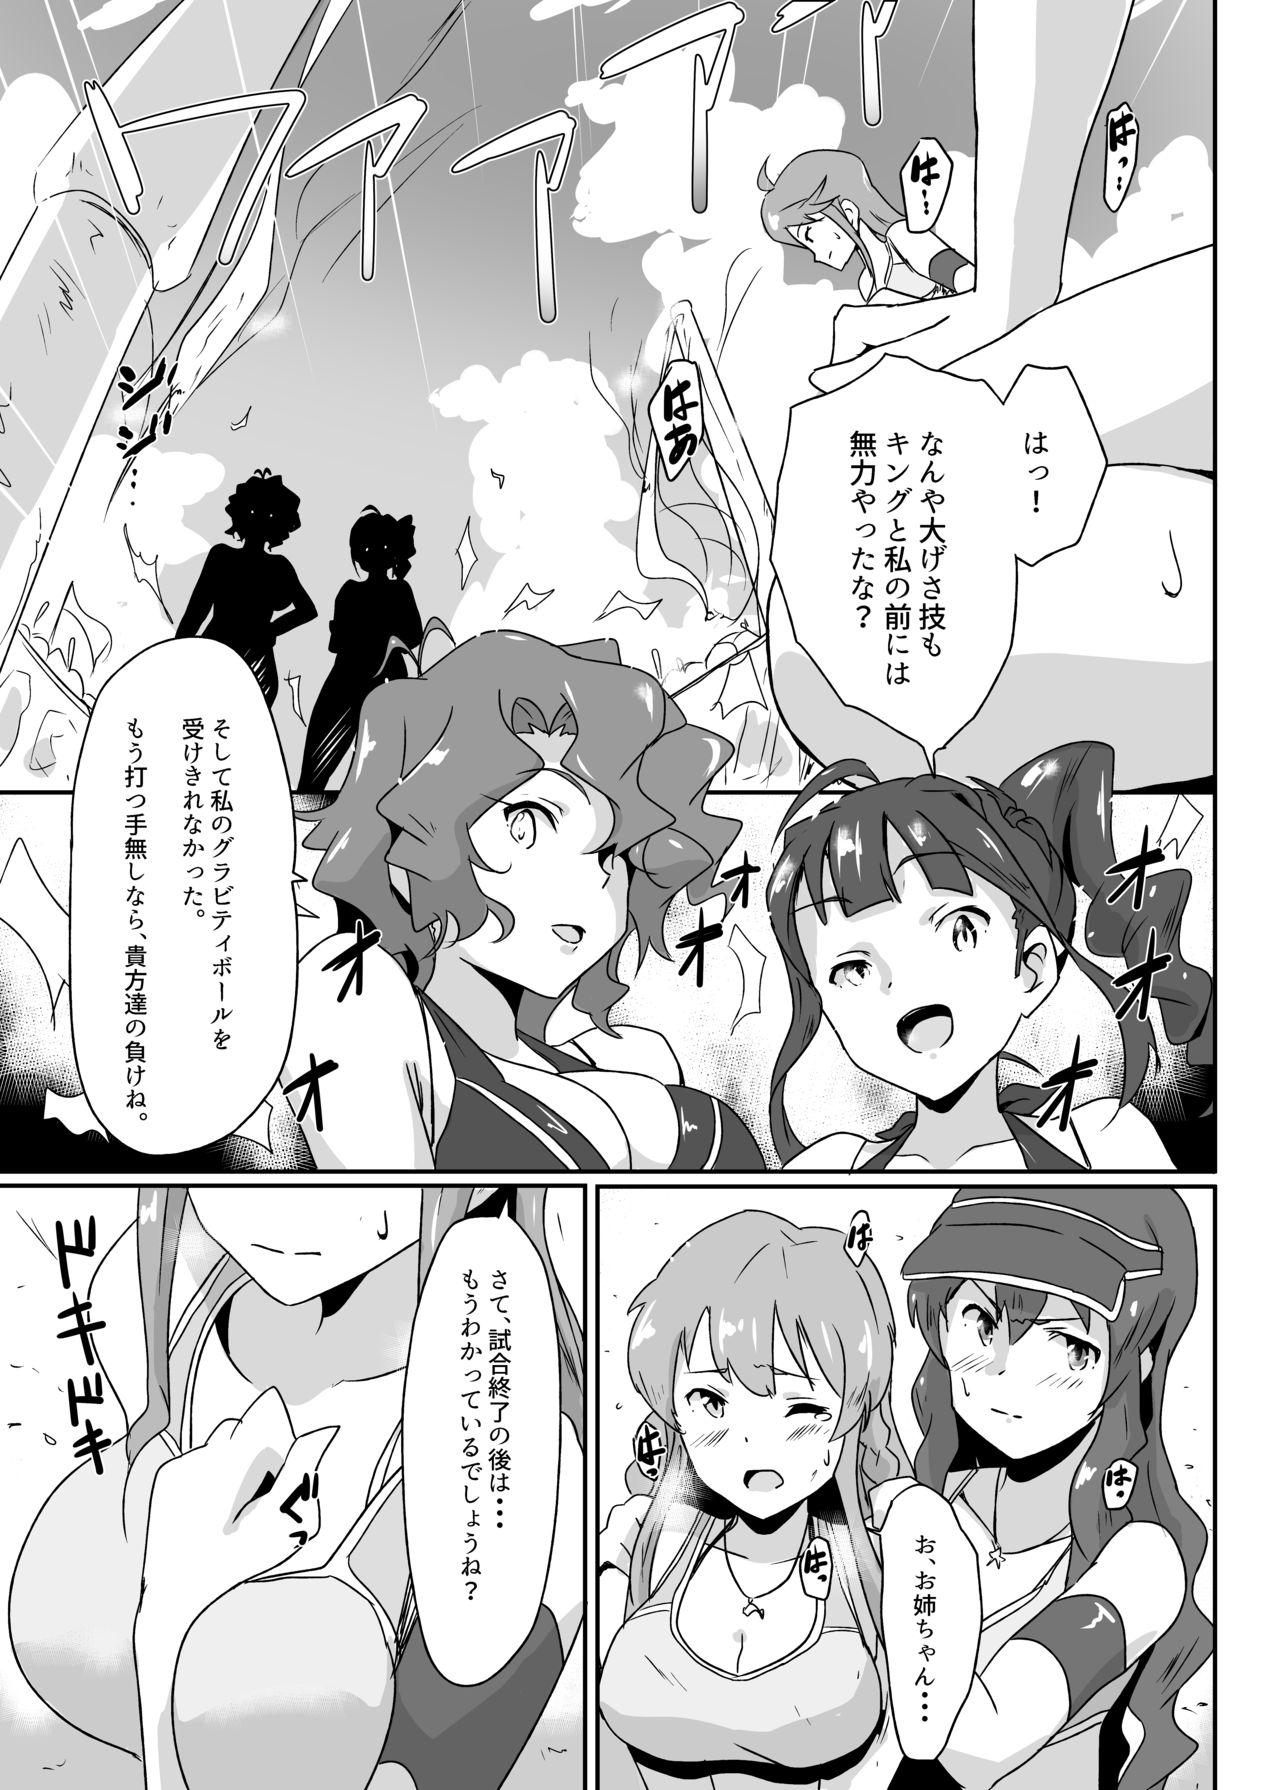 Sapphic Erotica Gang Bangs Volleyball!!! - The idolmaster Big Ass - Page 2